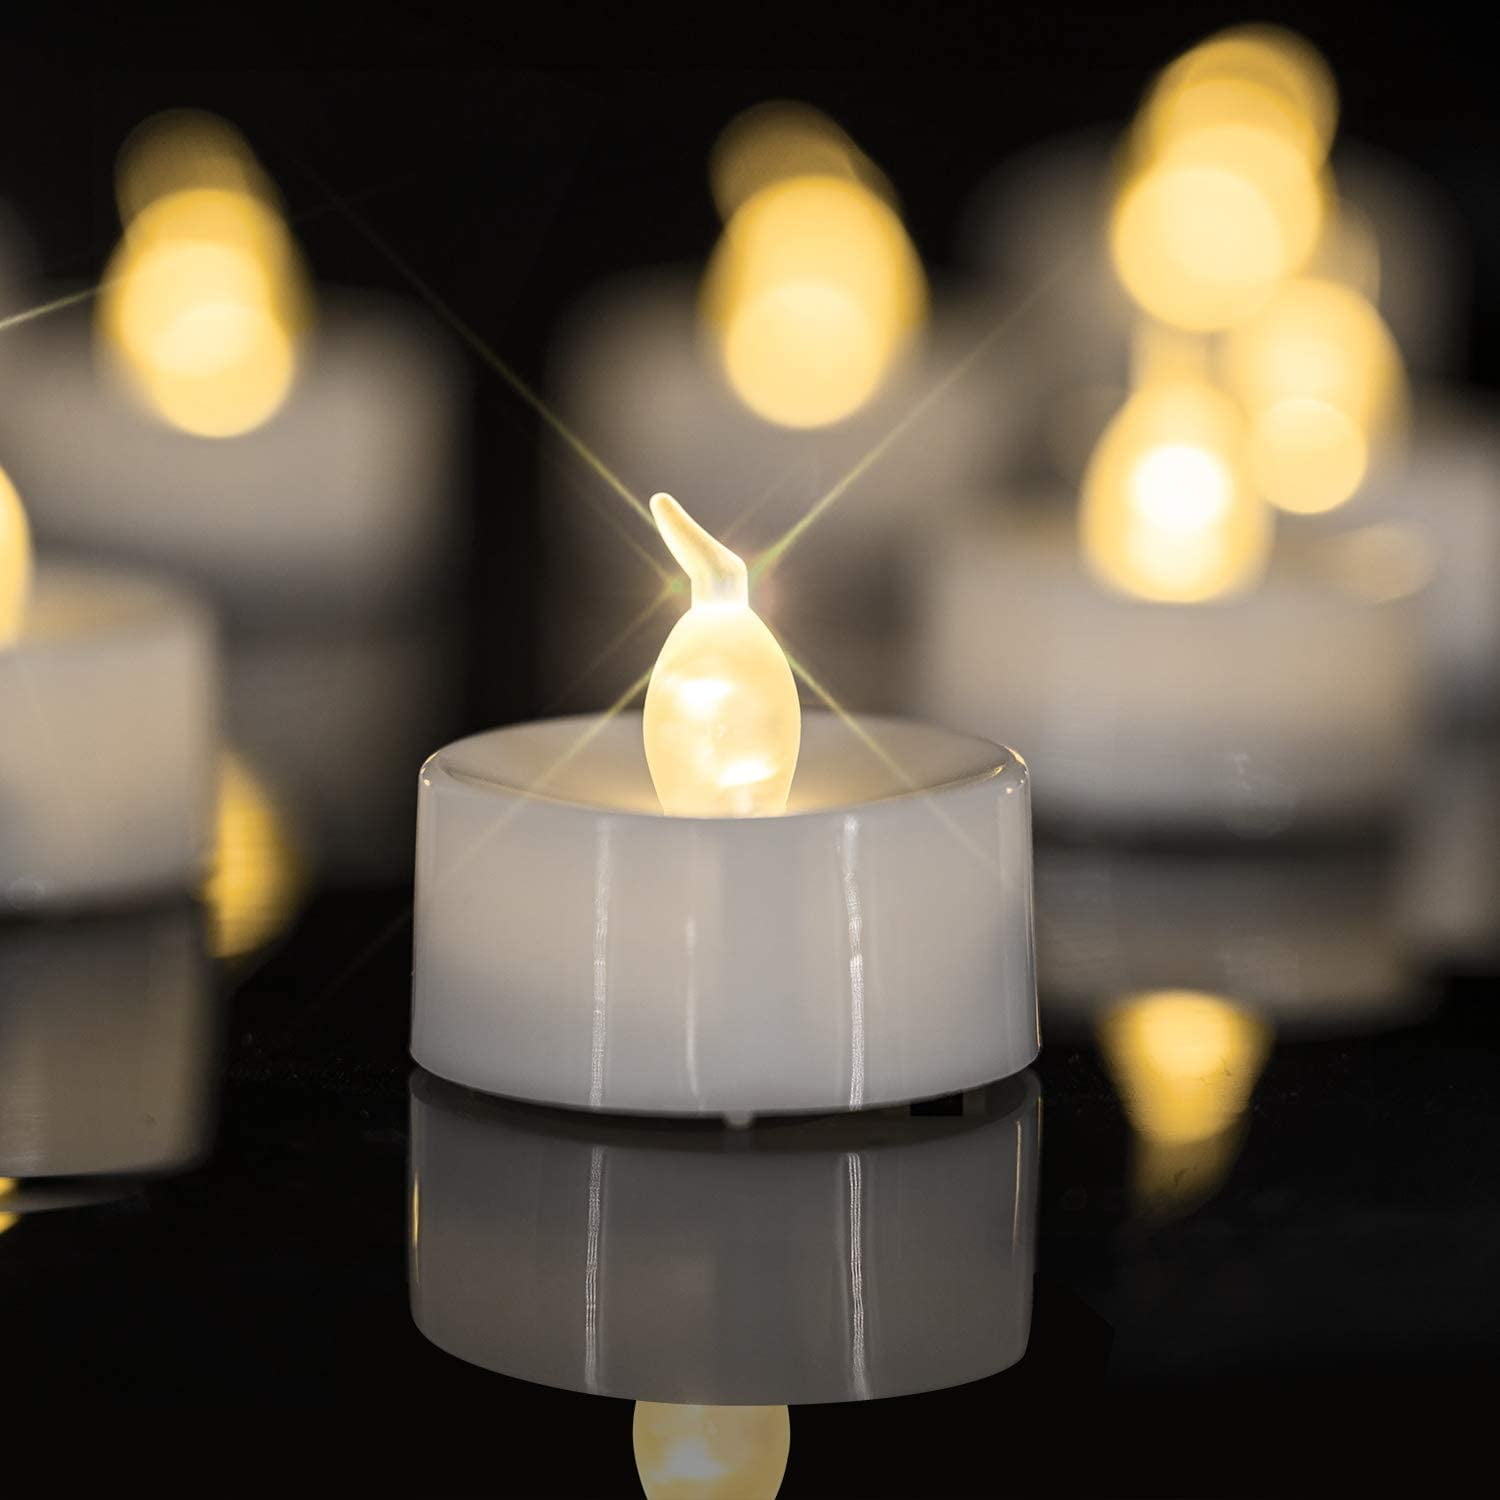 Homemory Pcs Battery Tea Lights Bulk, Flameless Flickering Warm White Electric Candles, Long Lasting Battery Life, Ideal for Wedding, Votive, Dining Room - Walmart.com